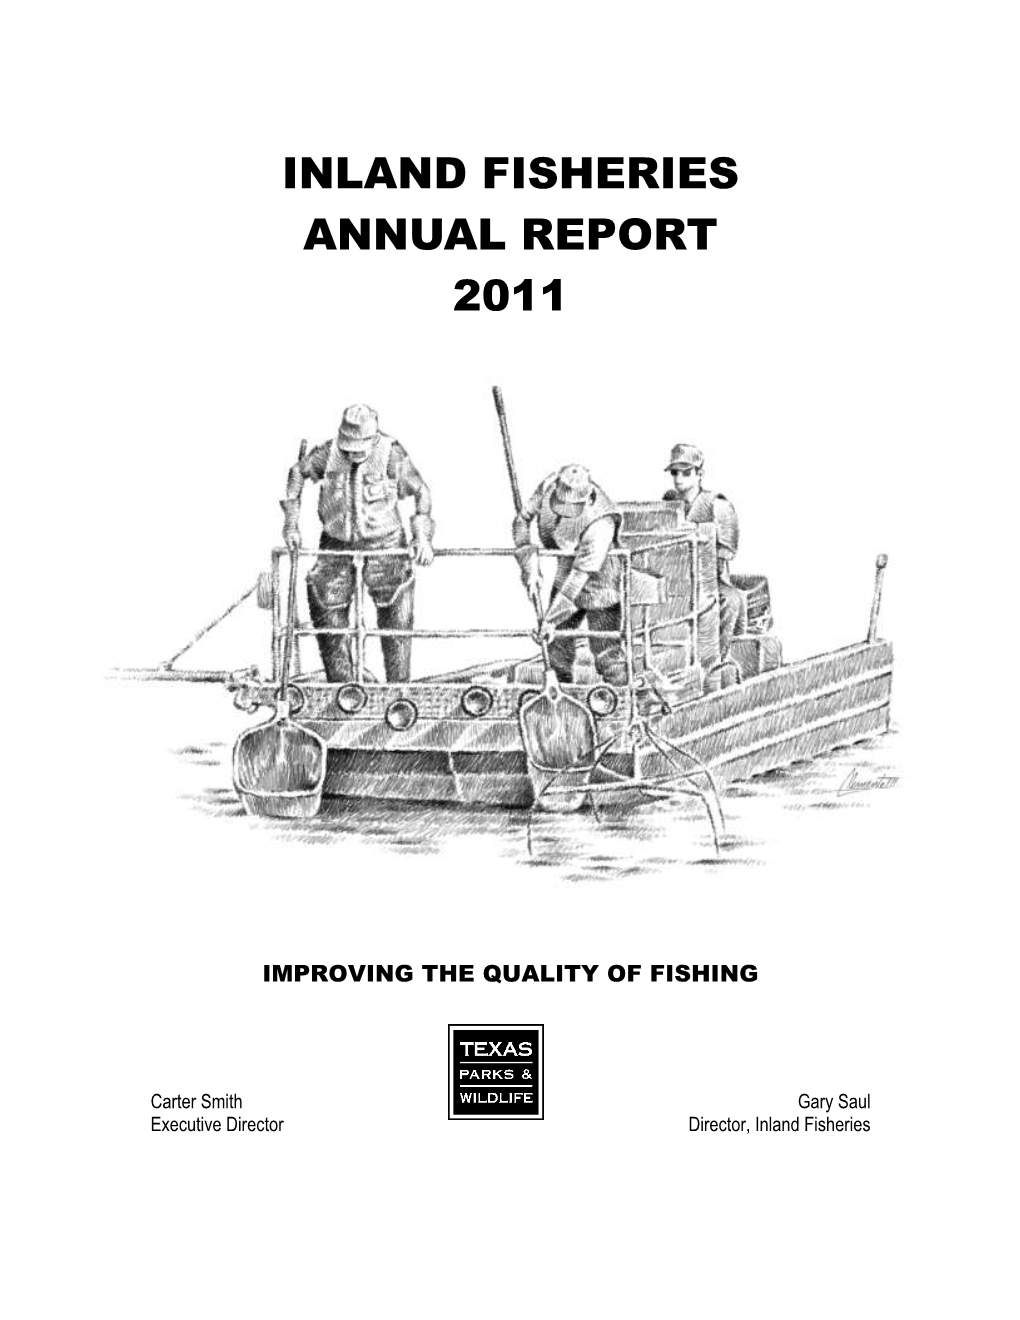 Inland Fisheries Annual Report 2011